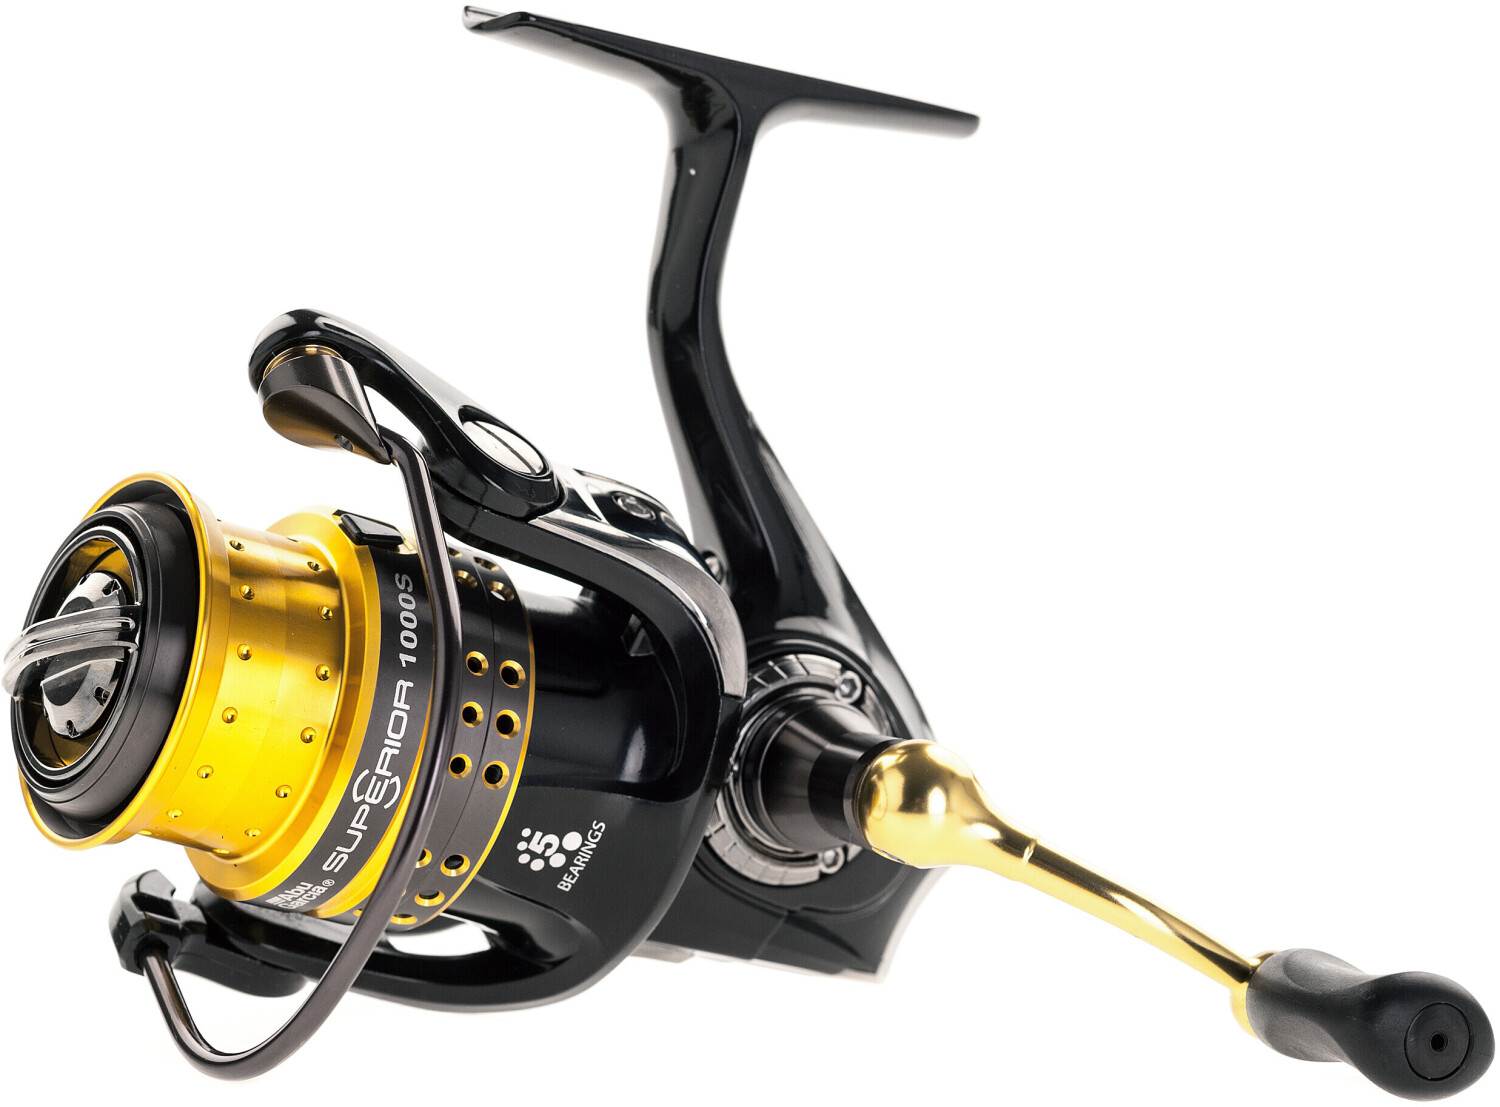 Buy Abu Garcia Superior from £69.49 (Today) – Best Deals on idealo